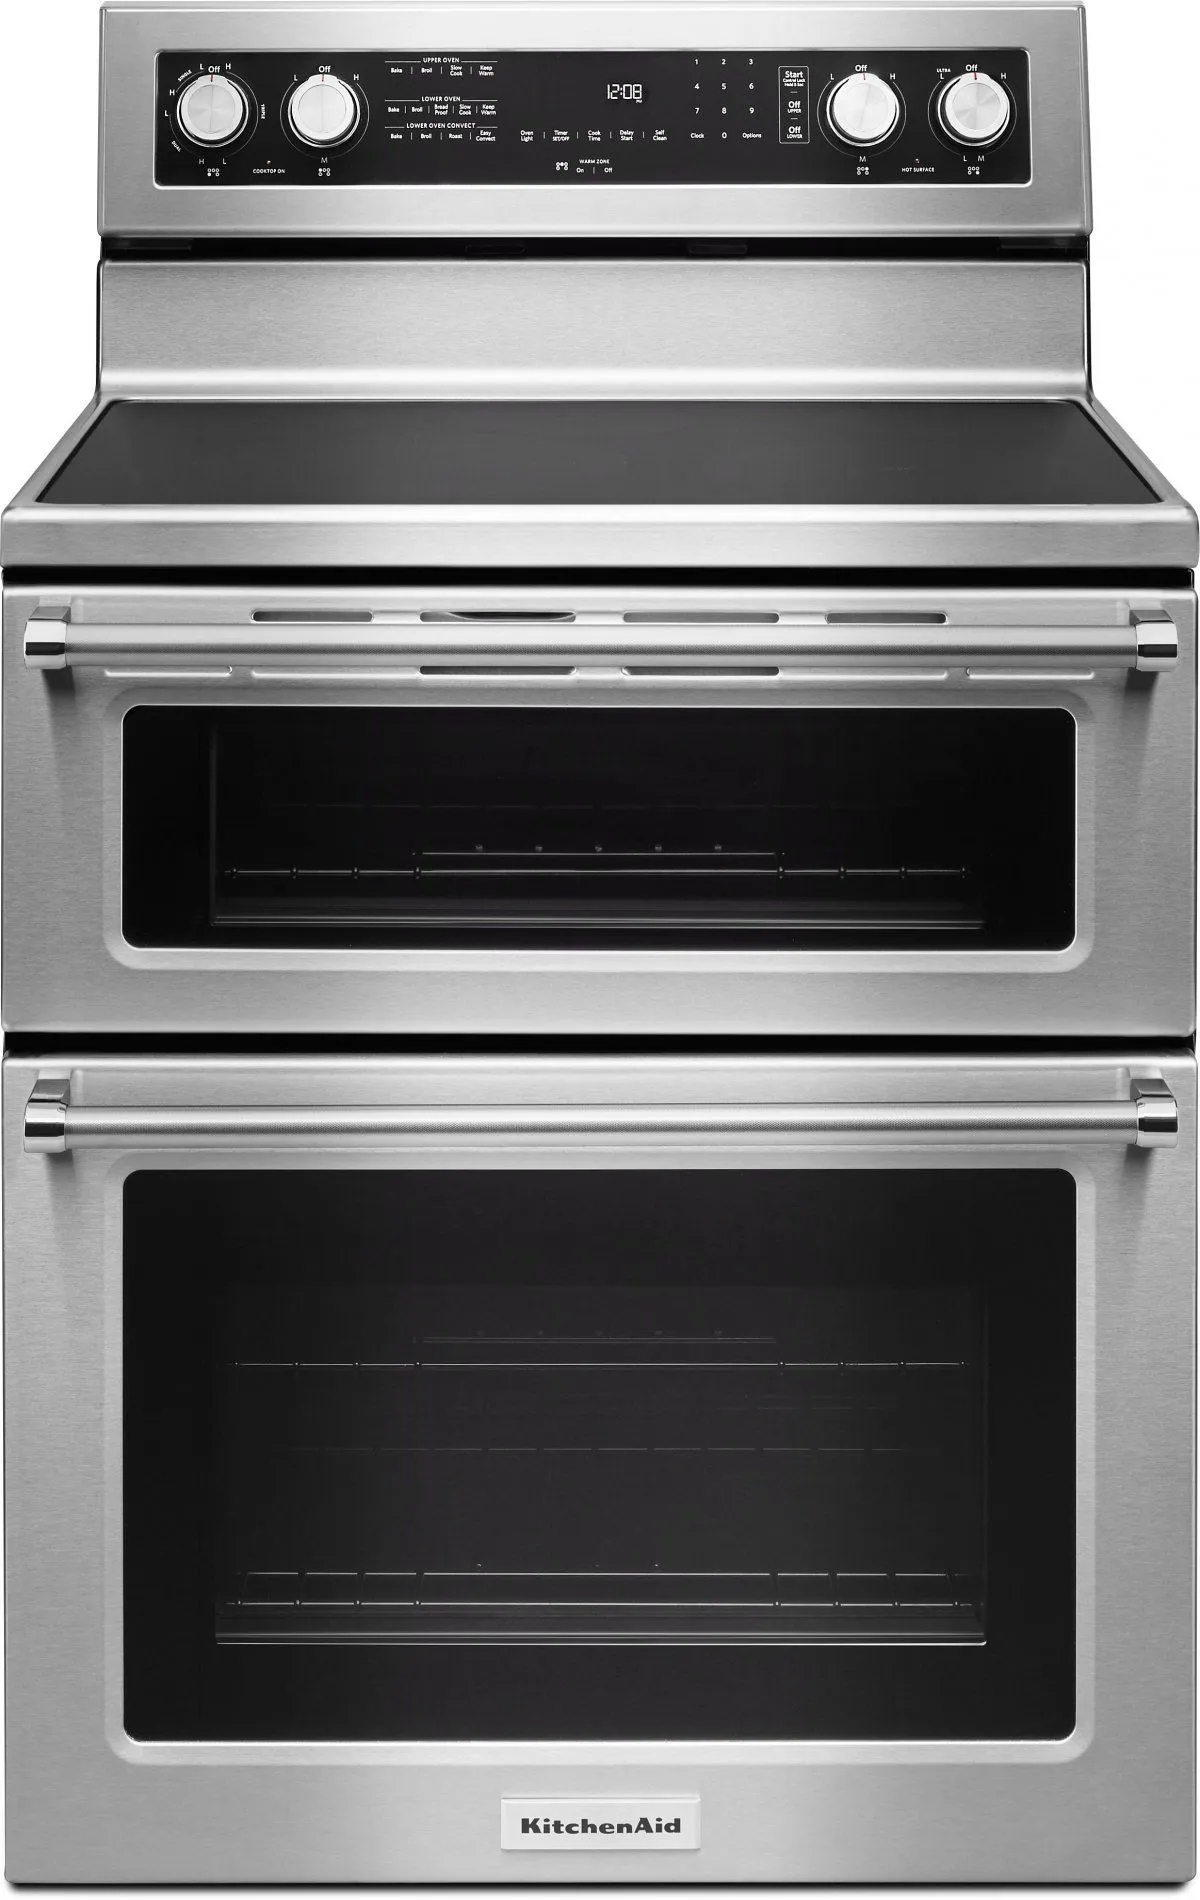 Front view of the KitchenAid KFED500ESS double oven electric range 